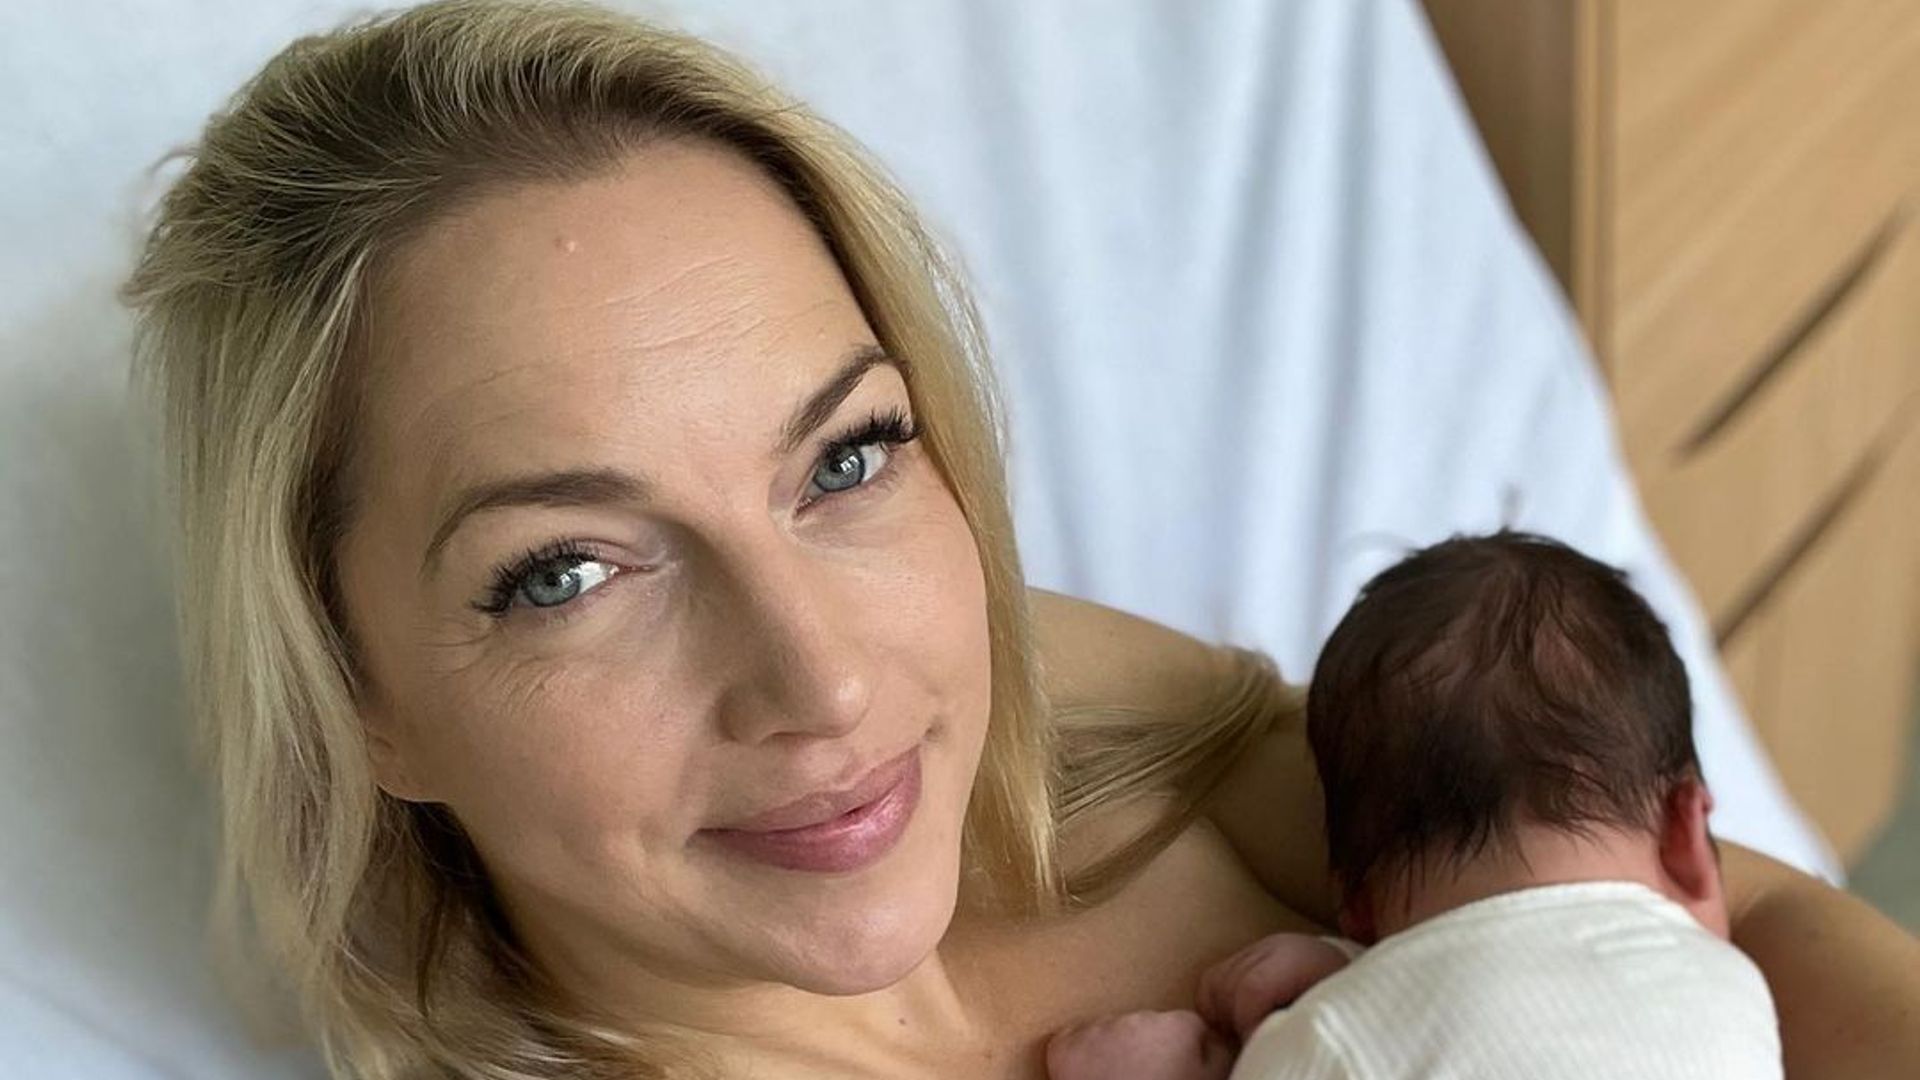 Emma Vardy welcomed her baby boy Jago Fionn in August 